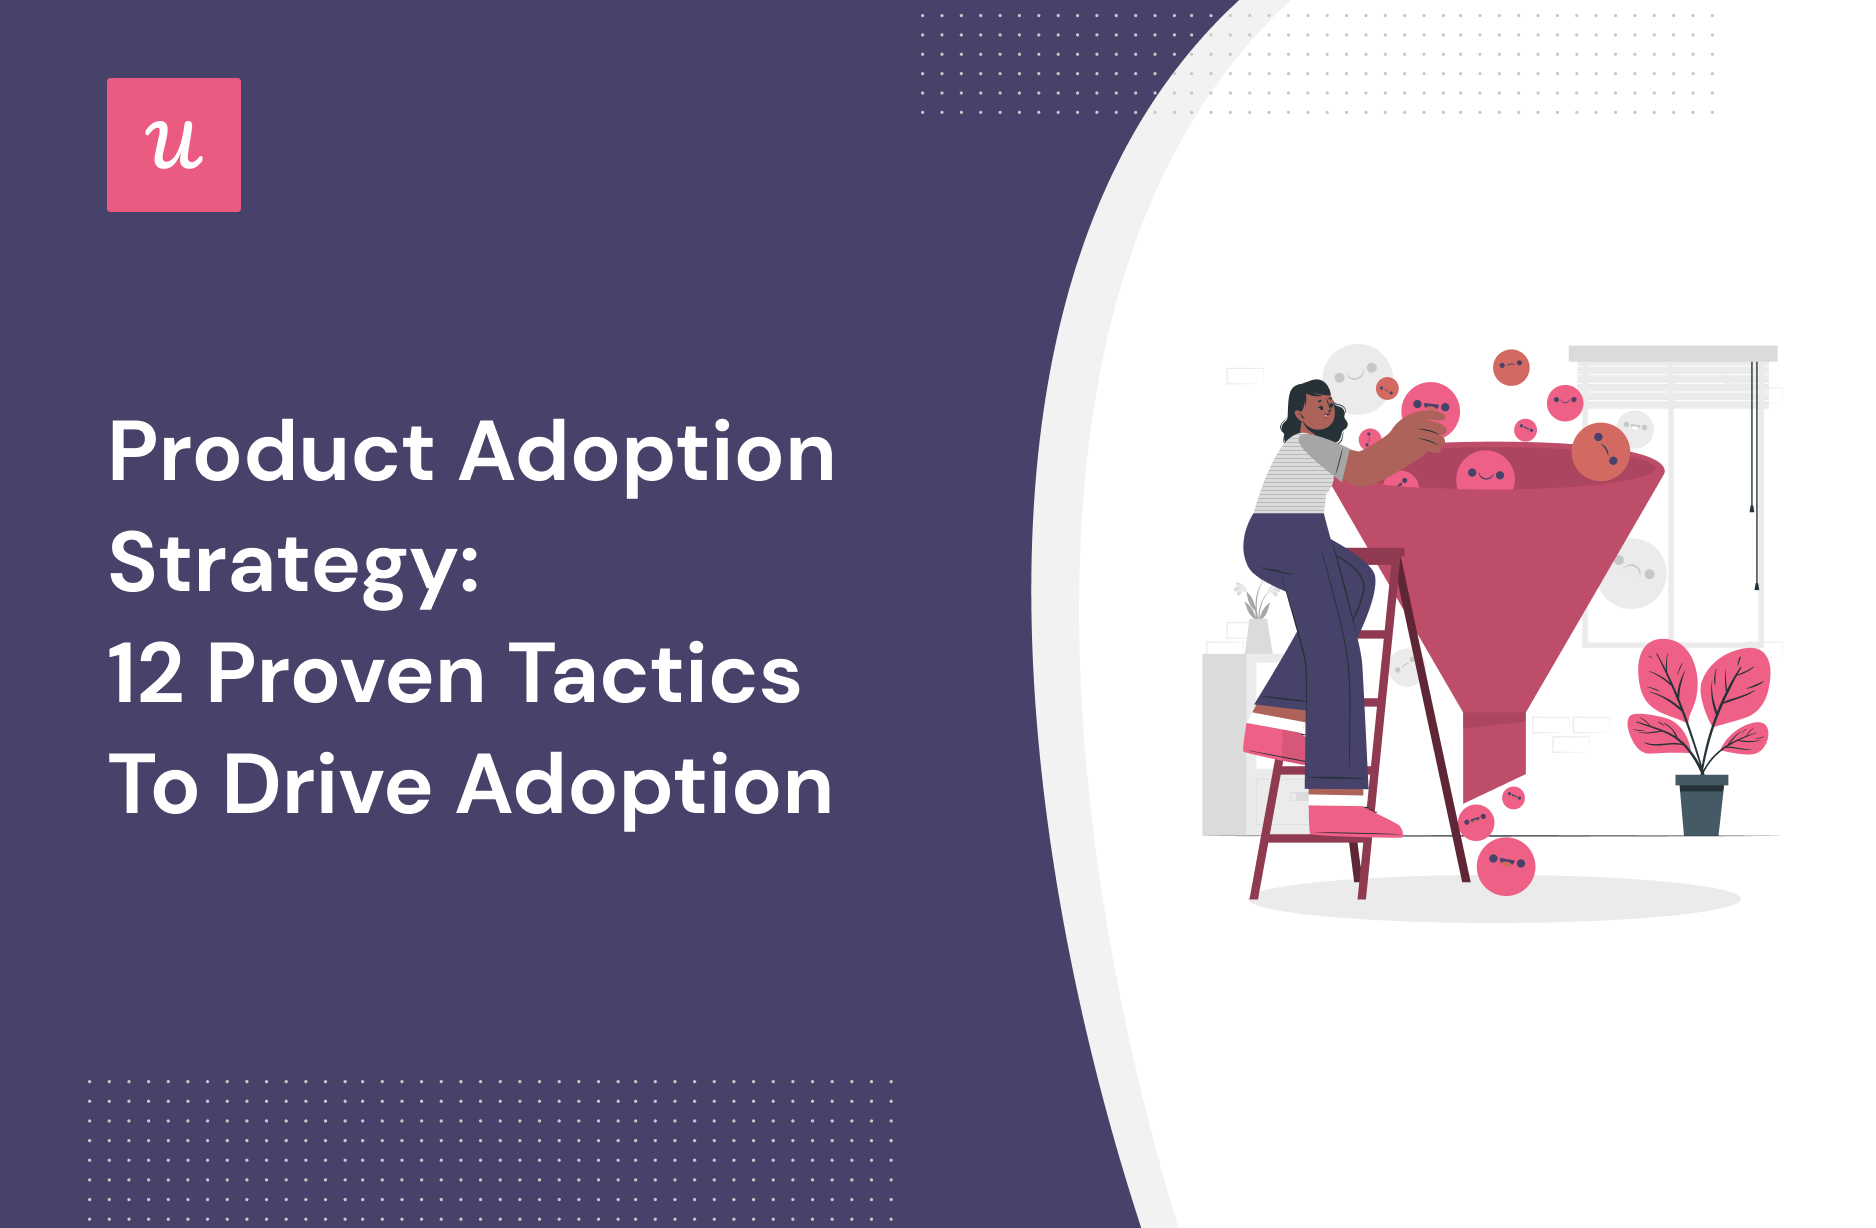 Product Adoption Strategy: 12 Proven Tactics to Drive Adoption